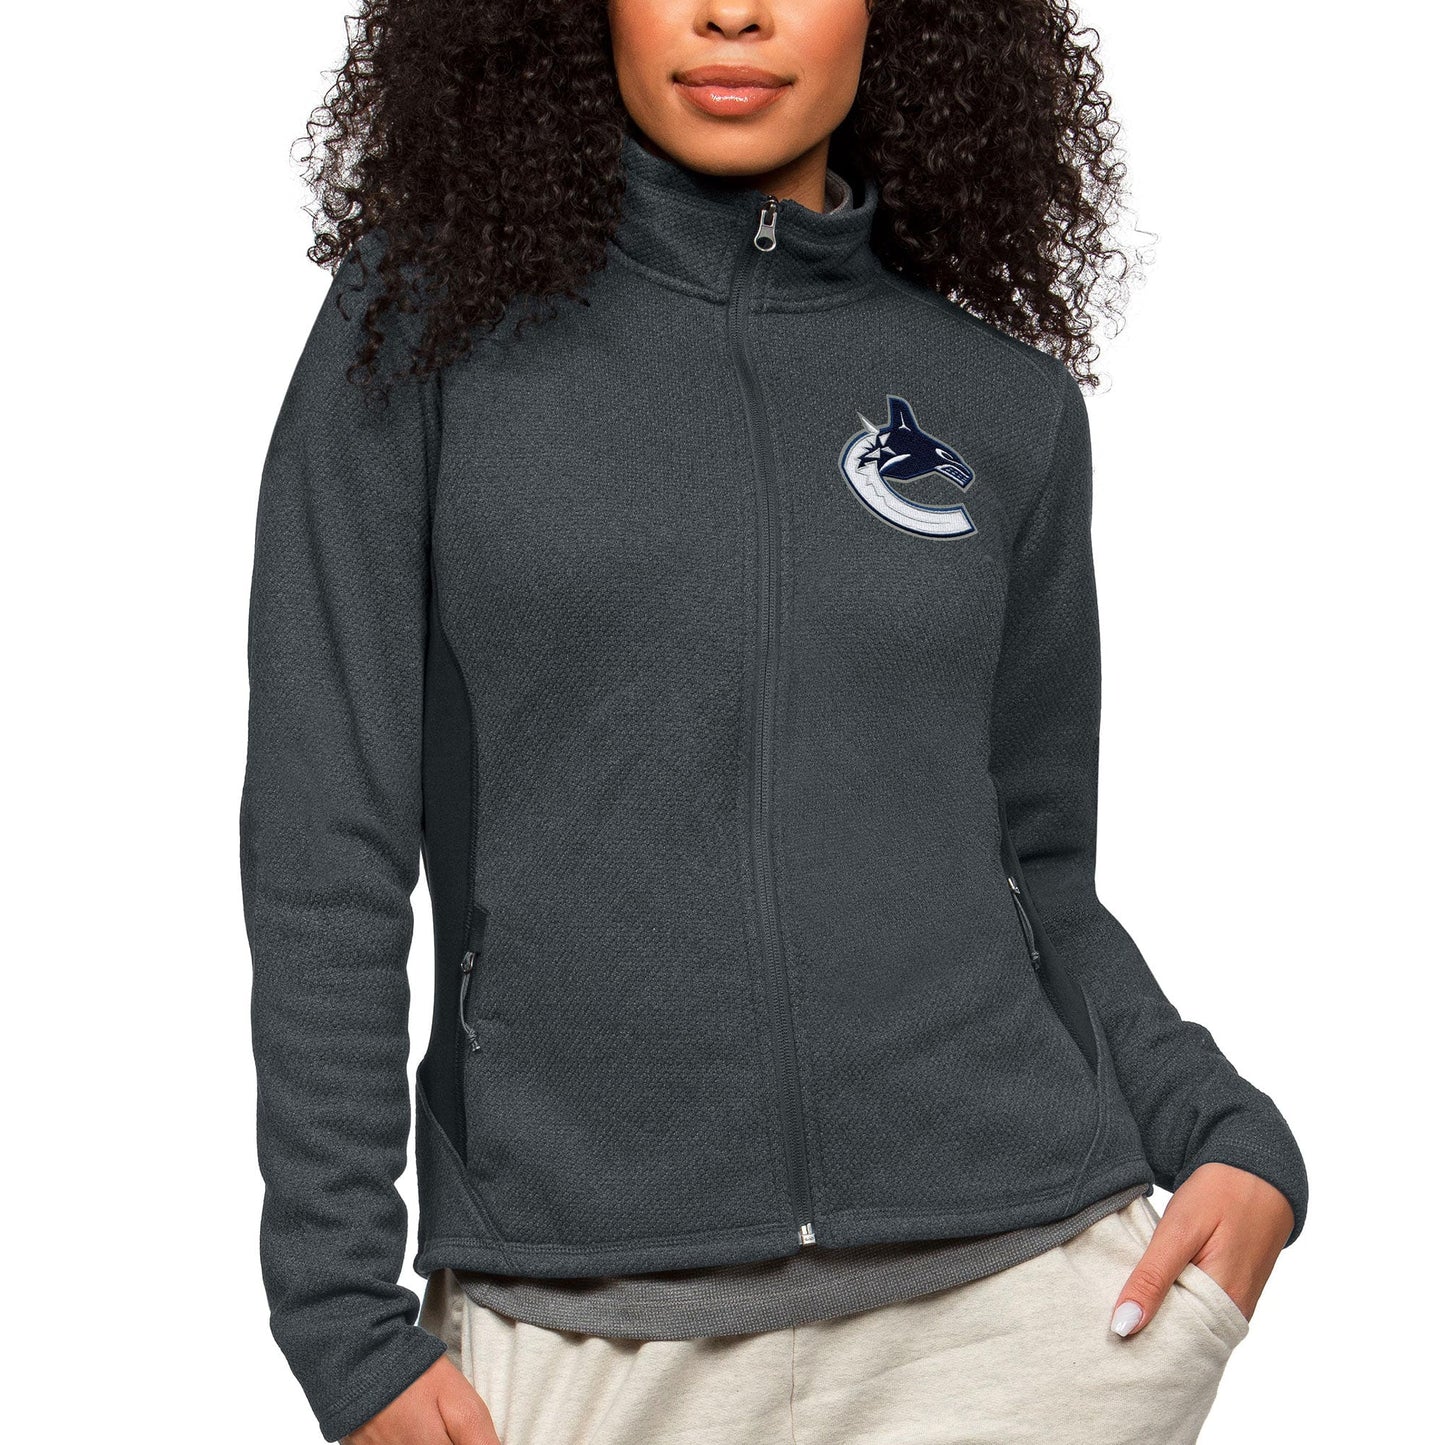 Women's Antigua Heather Charcoal Vancouver Canucks Primary Logo Course Full-Zip Jacket